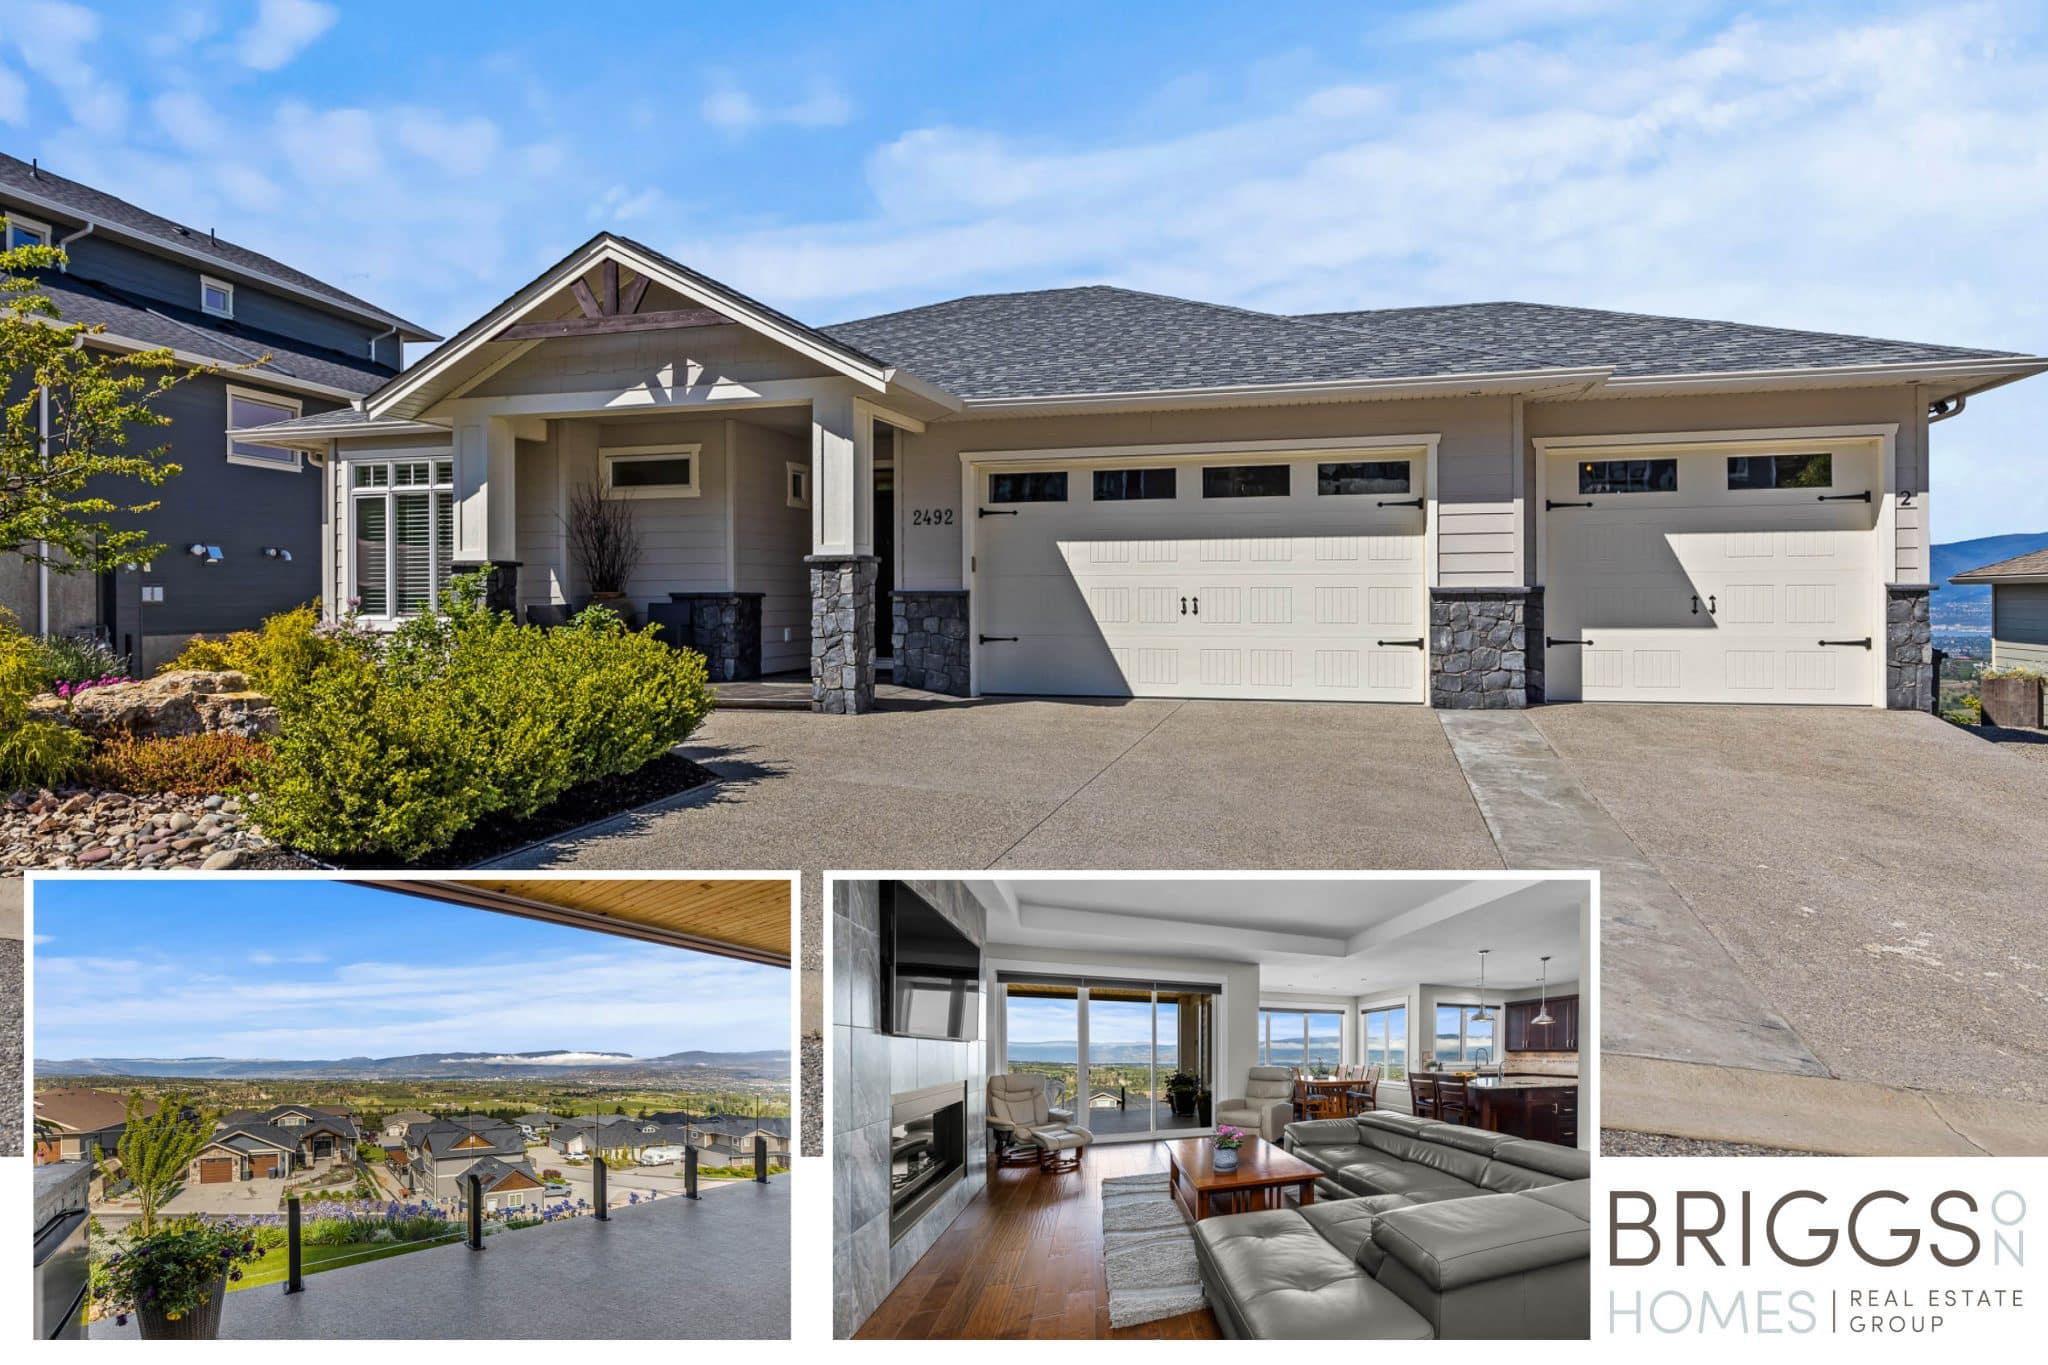 Just Listed! Beautiful walkout rancher